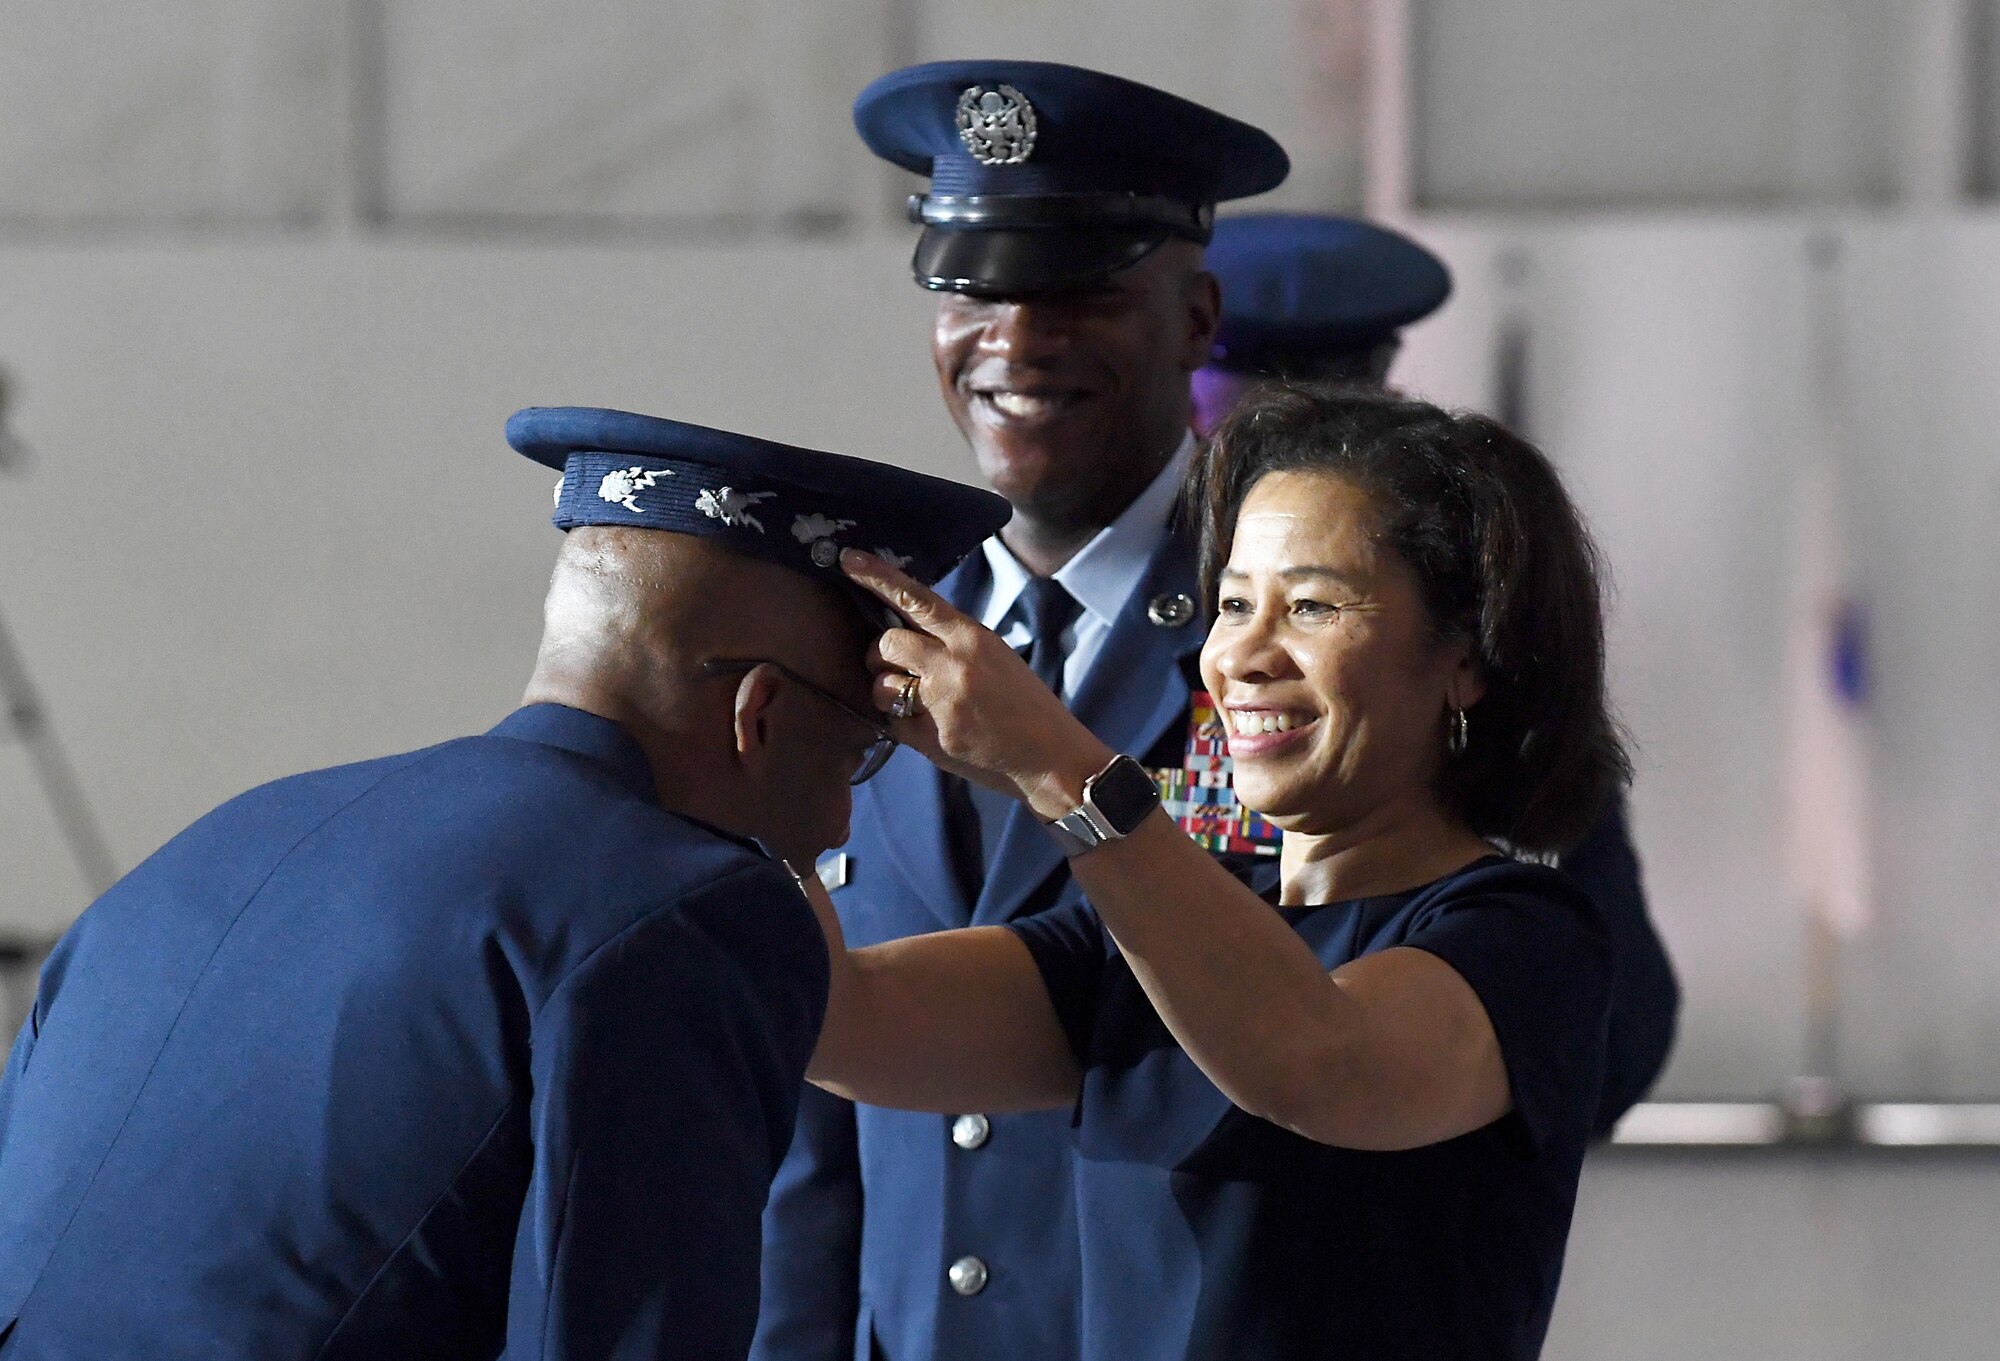 Sharene Brown, spouse of incoming Air Force Chief of Staff Gen. Charles Q. Brown Jr., presents the official Air Force Chief of Staff service cap to her husband during the CSAF change of responsibility ceremony at Joint Base Andrews, Md., Aug. 6, 2020. Brown is the 22nd Chief of Staff of the Air Force. (U.S. Air Force photo by Staff Sgt. Chad Trujillo)